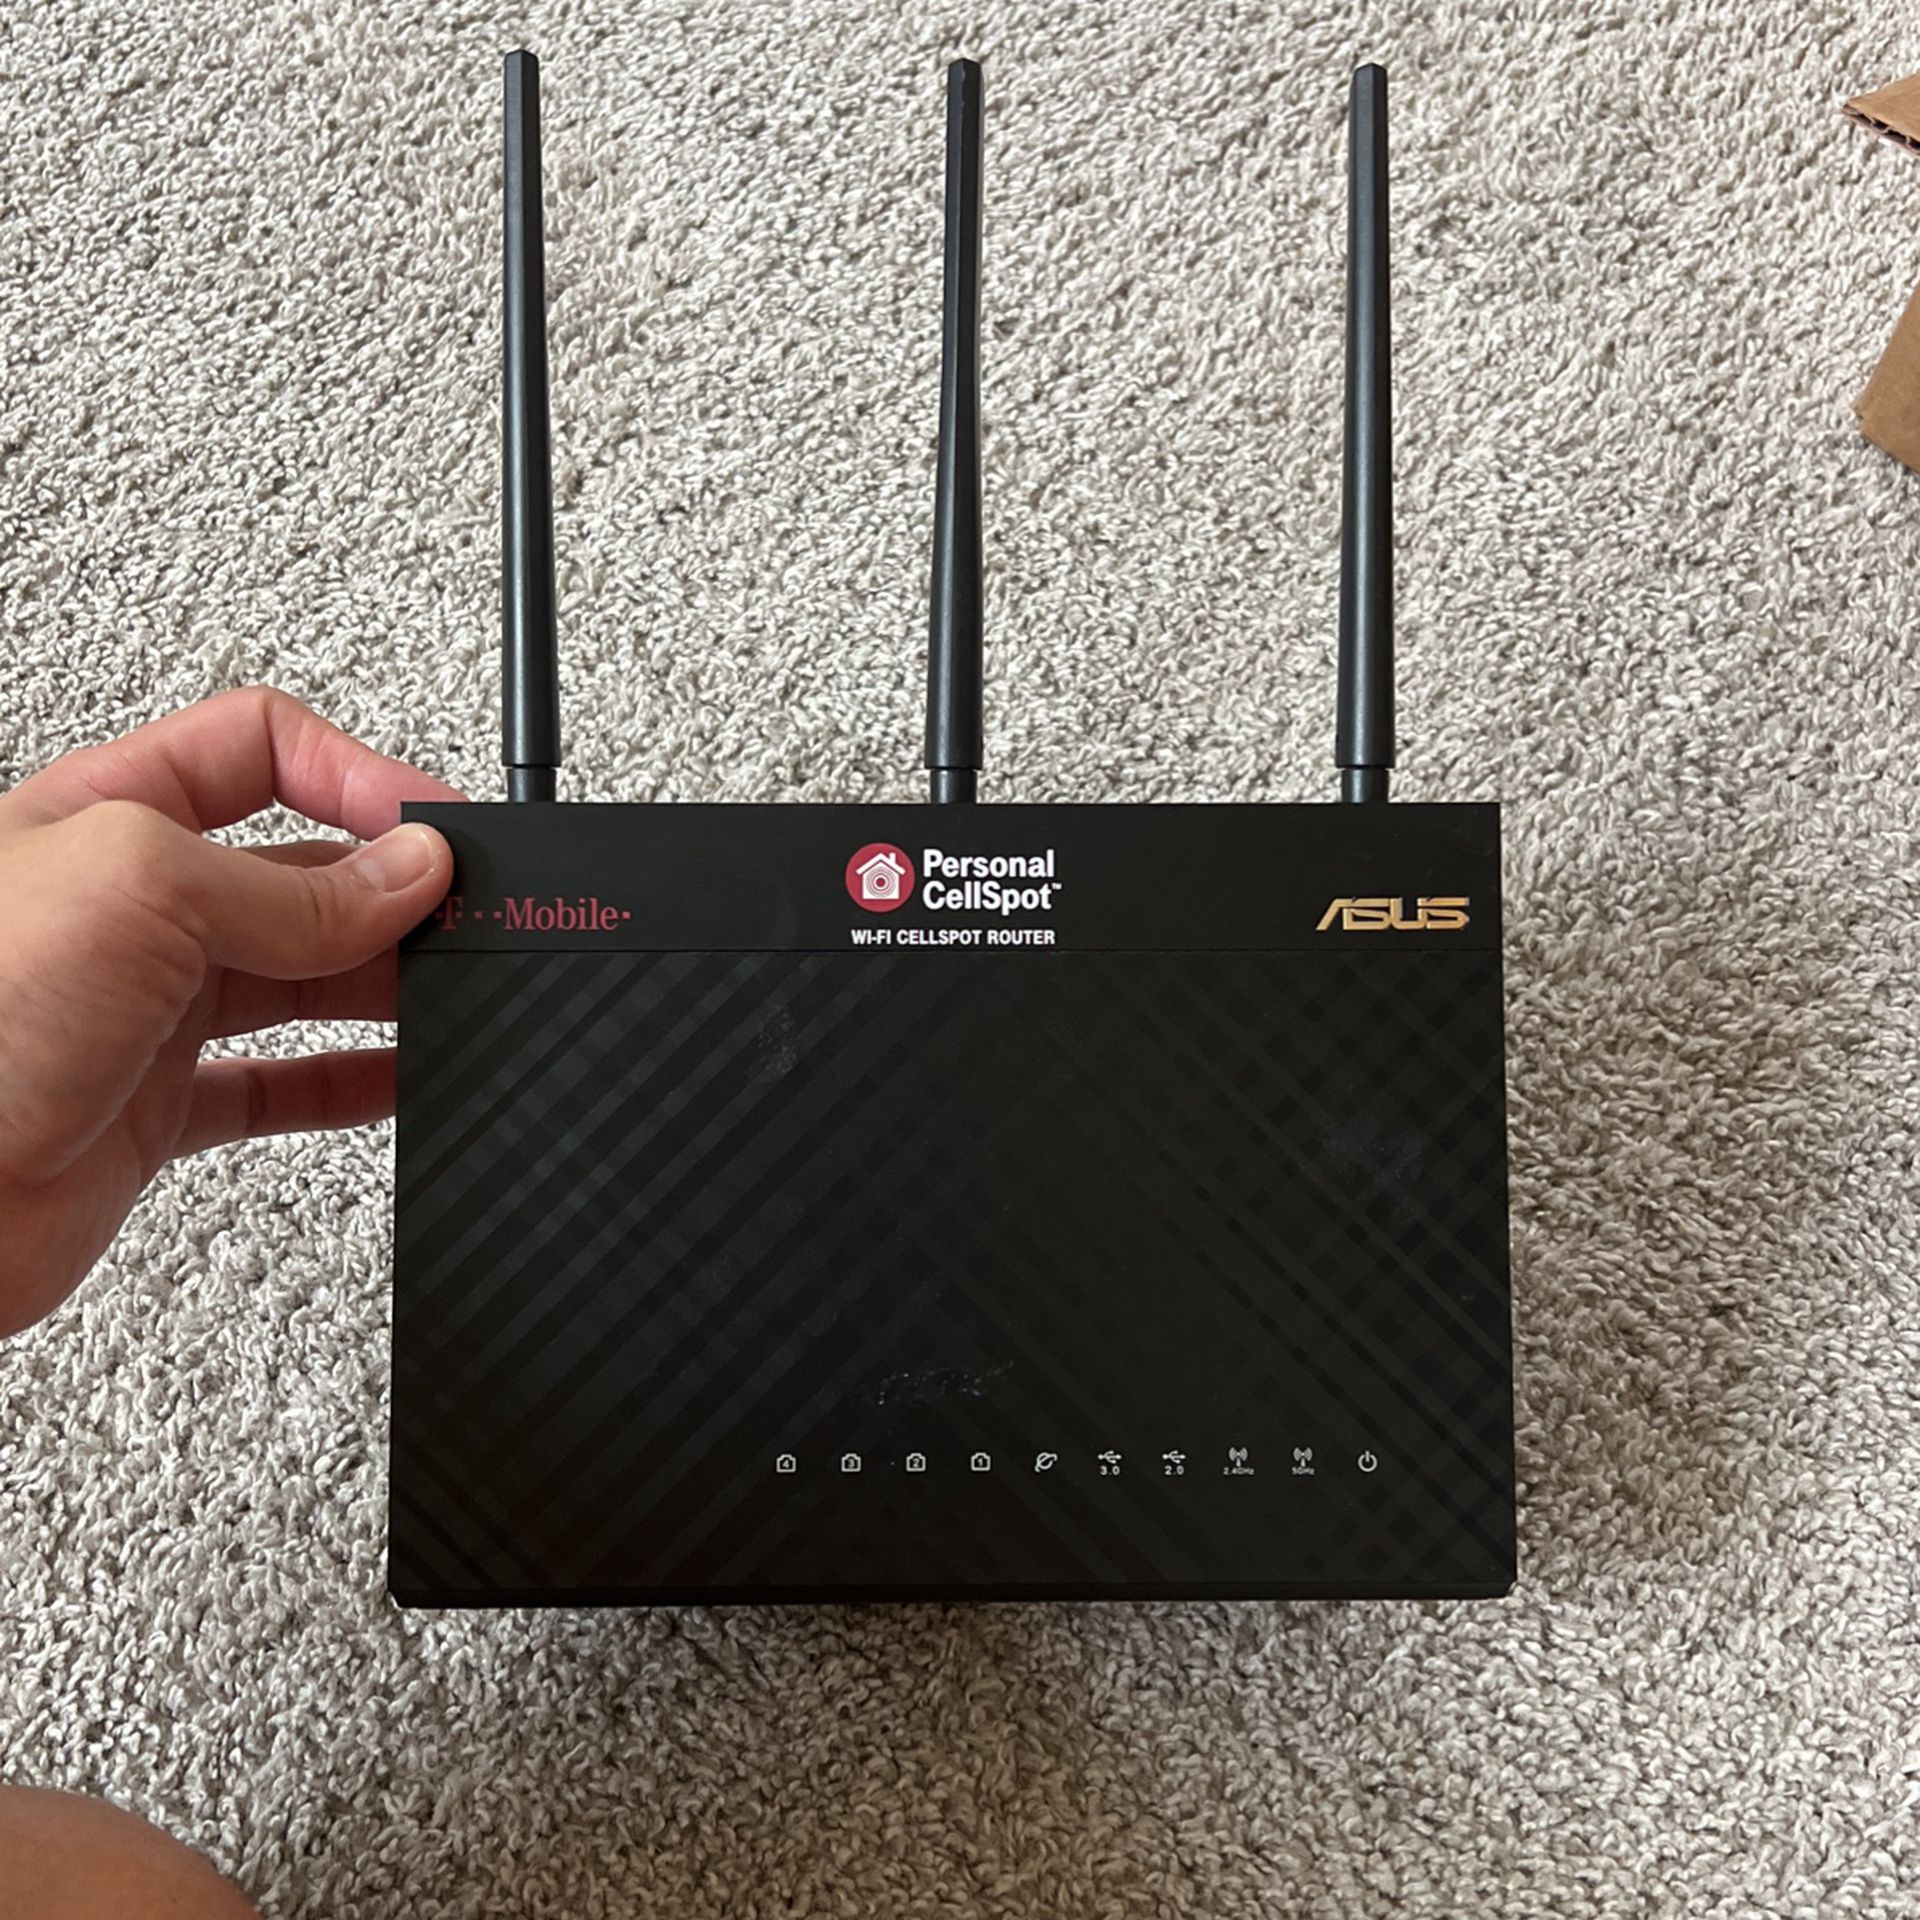 ASUS WiFi Router